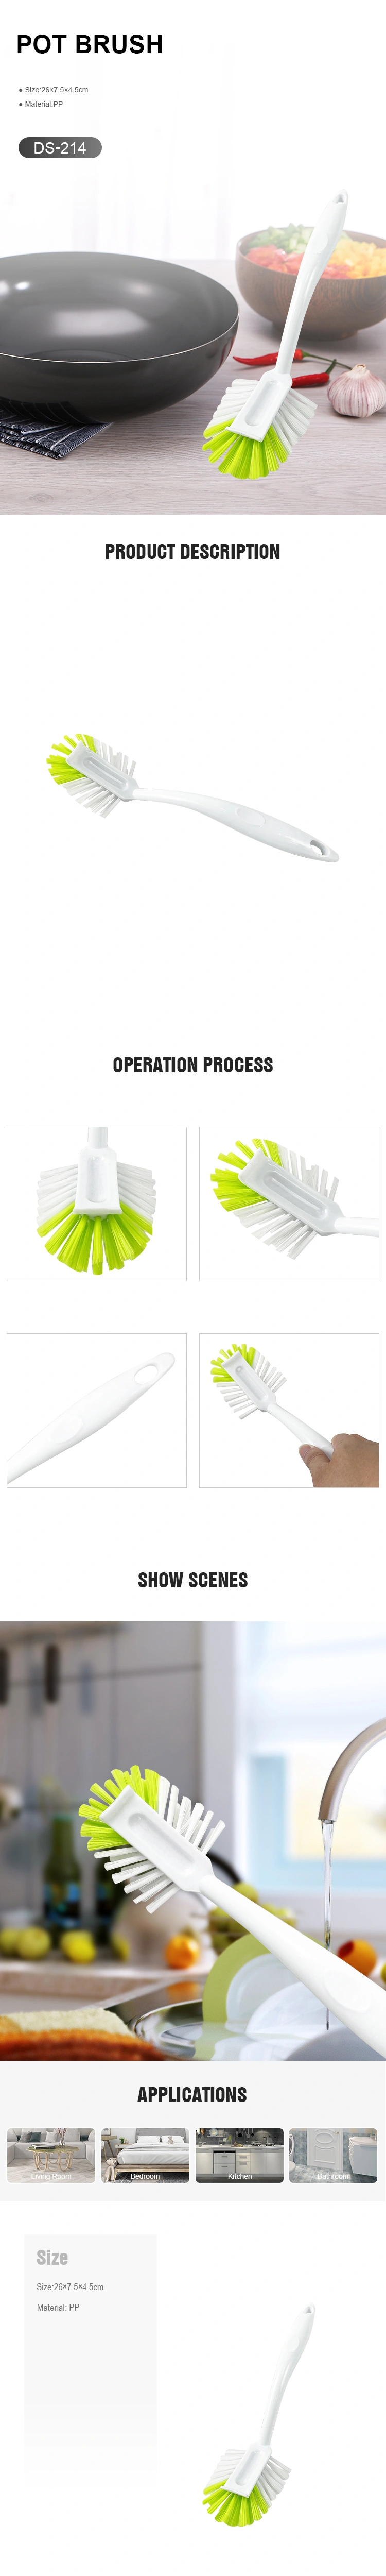 Household Cleaning Product Long Handle Plastic Brush Bottle Cleaning Bottle Wash Tools